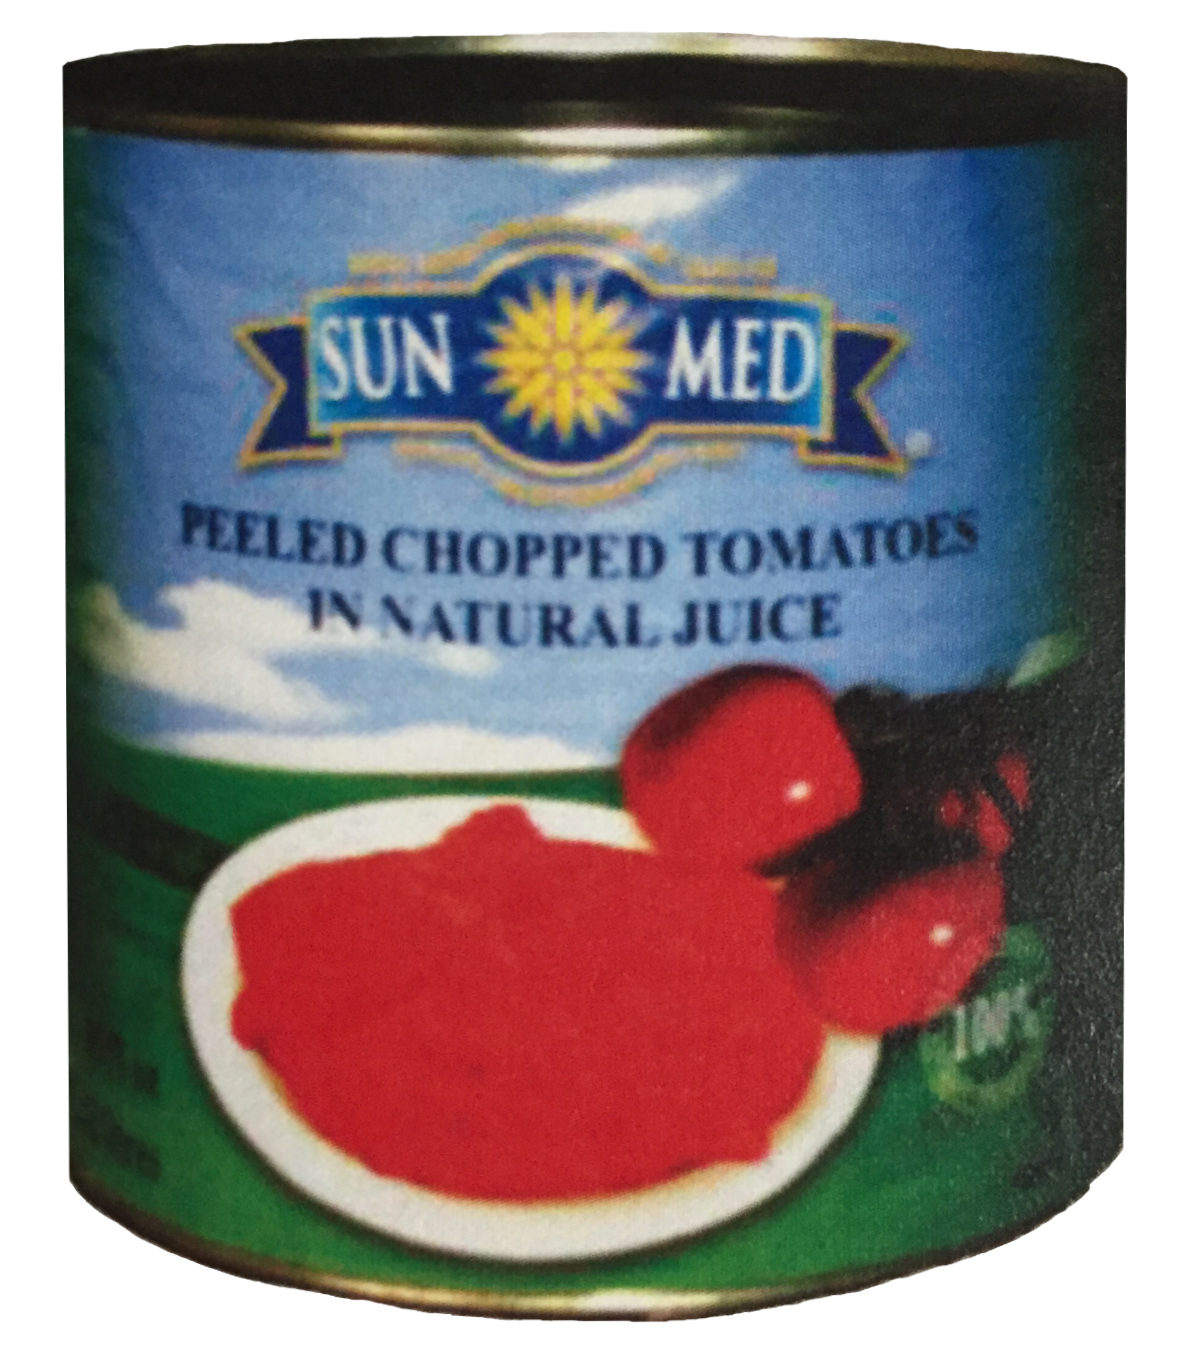 Diced peeled tomatoes in natural juice – 2.42 L